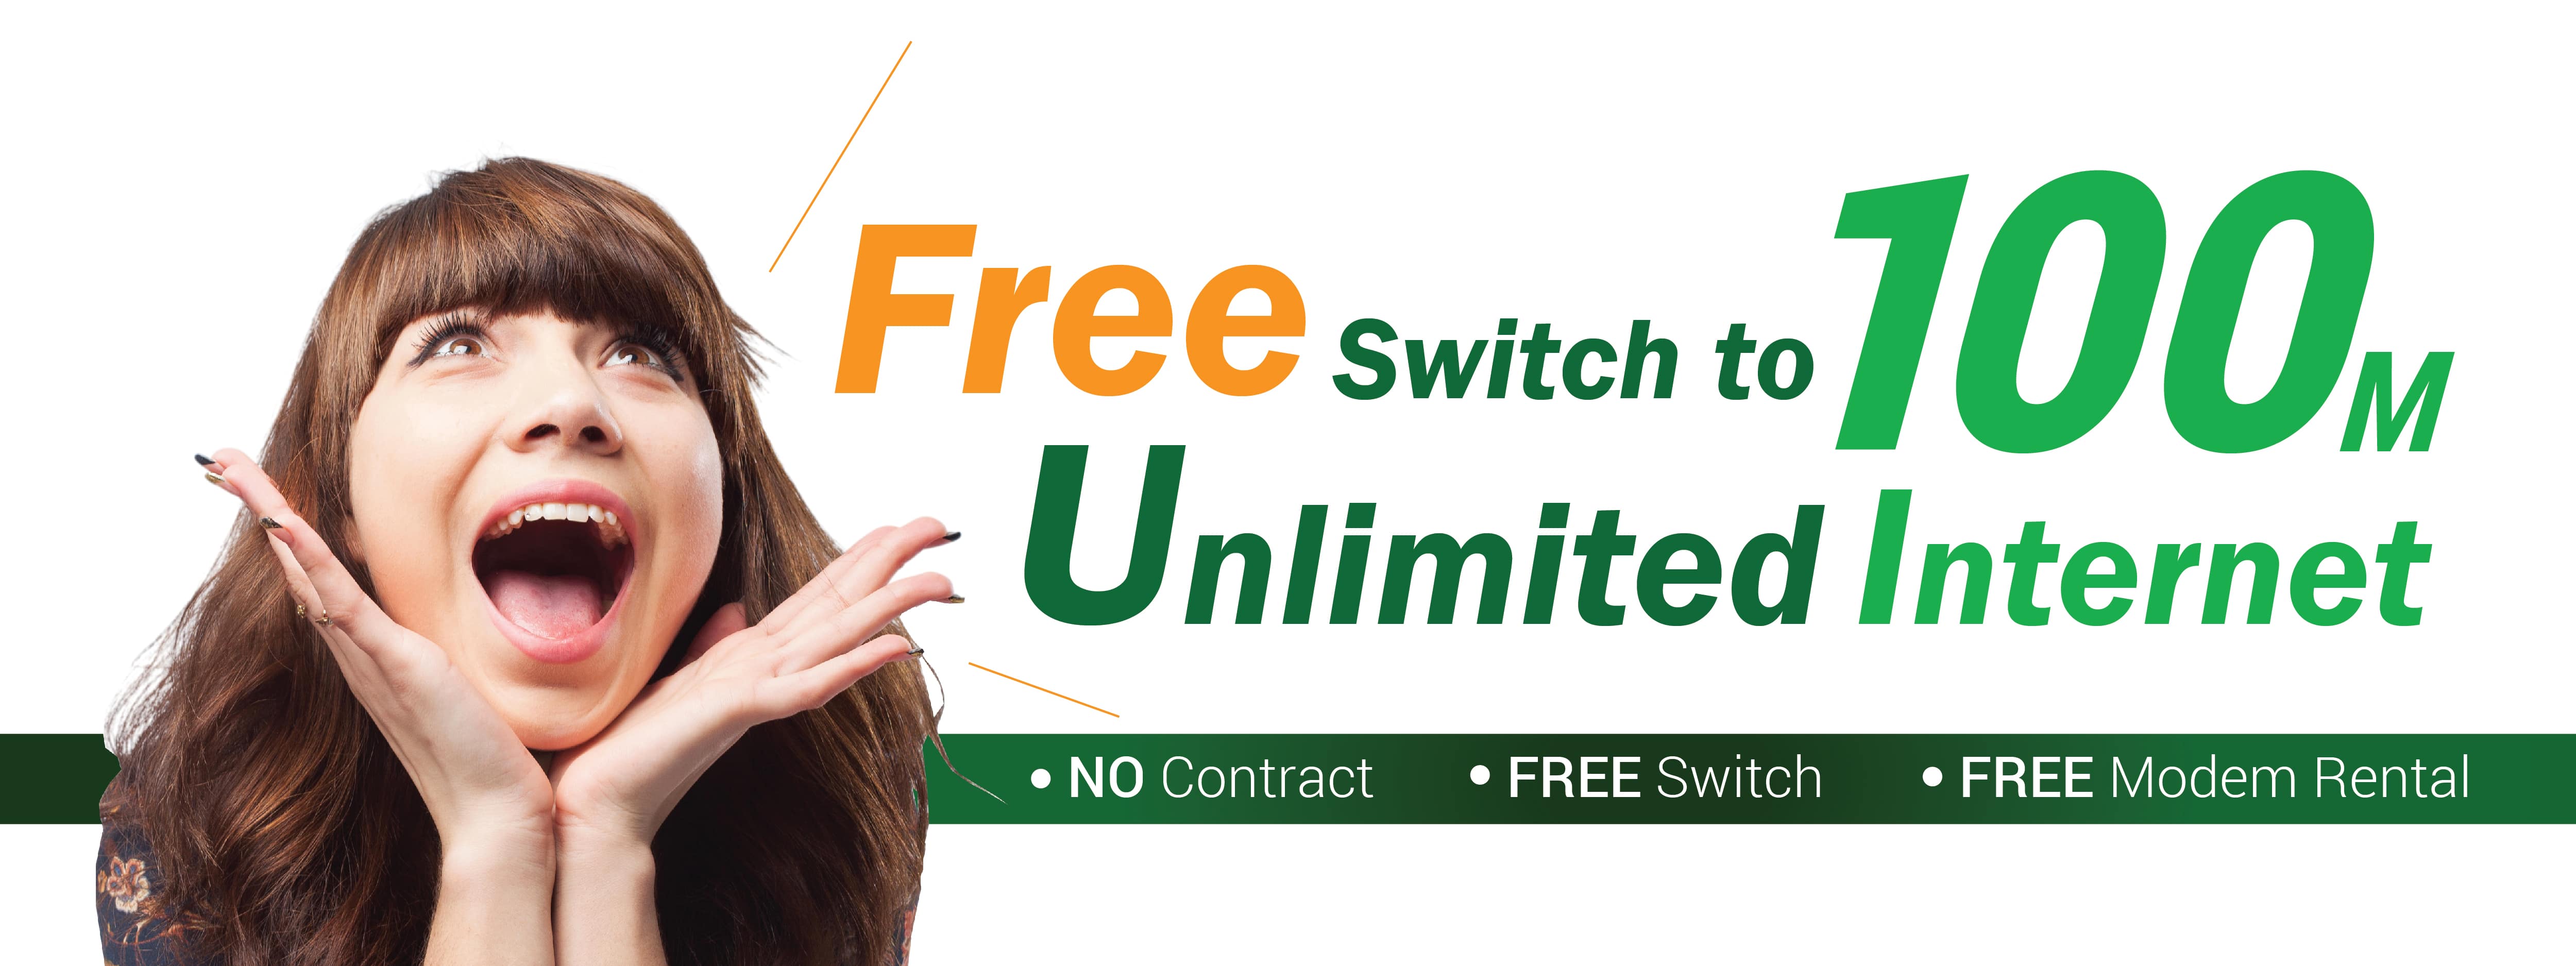 FREE Switch to 100M Unlimited Internet (PROMOTION HAS ENDED)